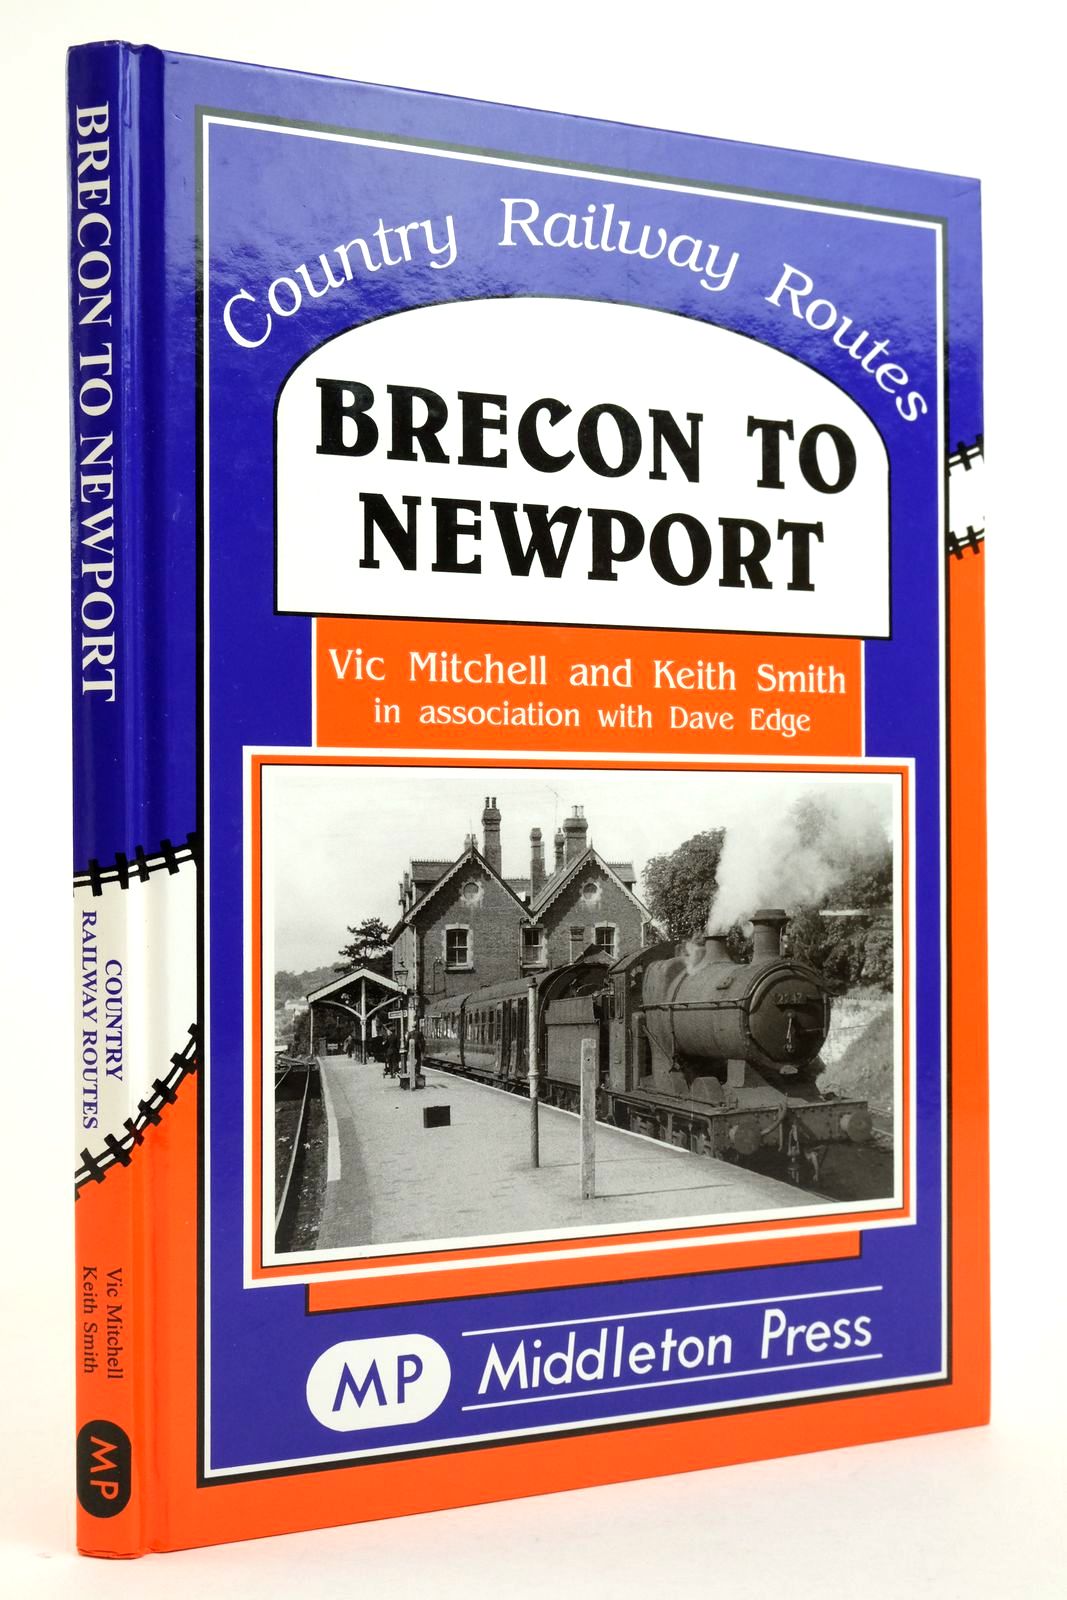 Photo of BRECON TO NEWPORT (COUNTRY RAILWAY ROUTES) written by Mitchell, Vic Smith, Keith Edge, Dave published by Middleton Press (STOCK CODE: 2136729)  for sale by Stella & Rose's Books